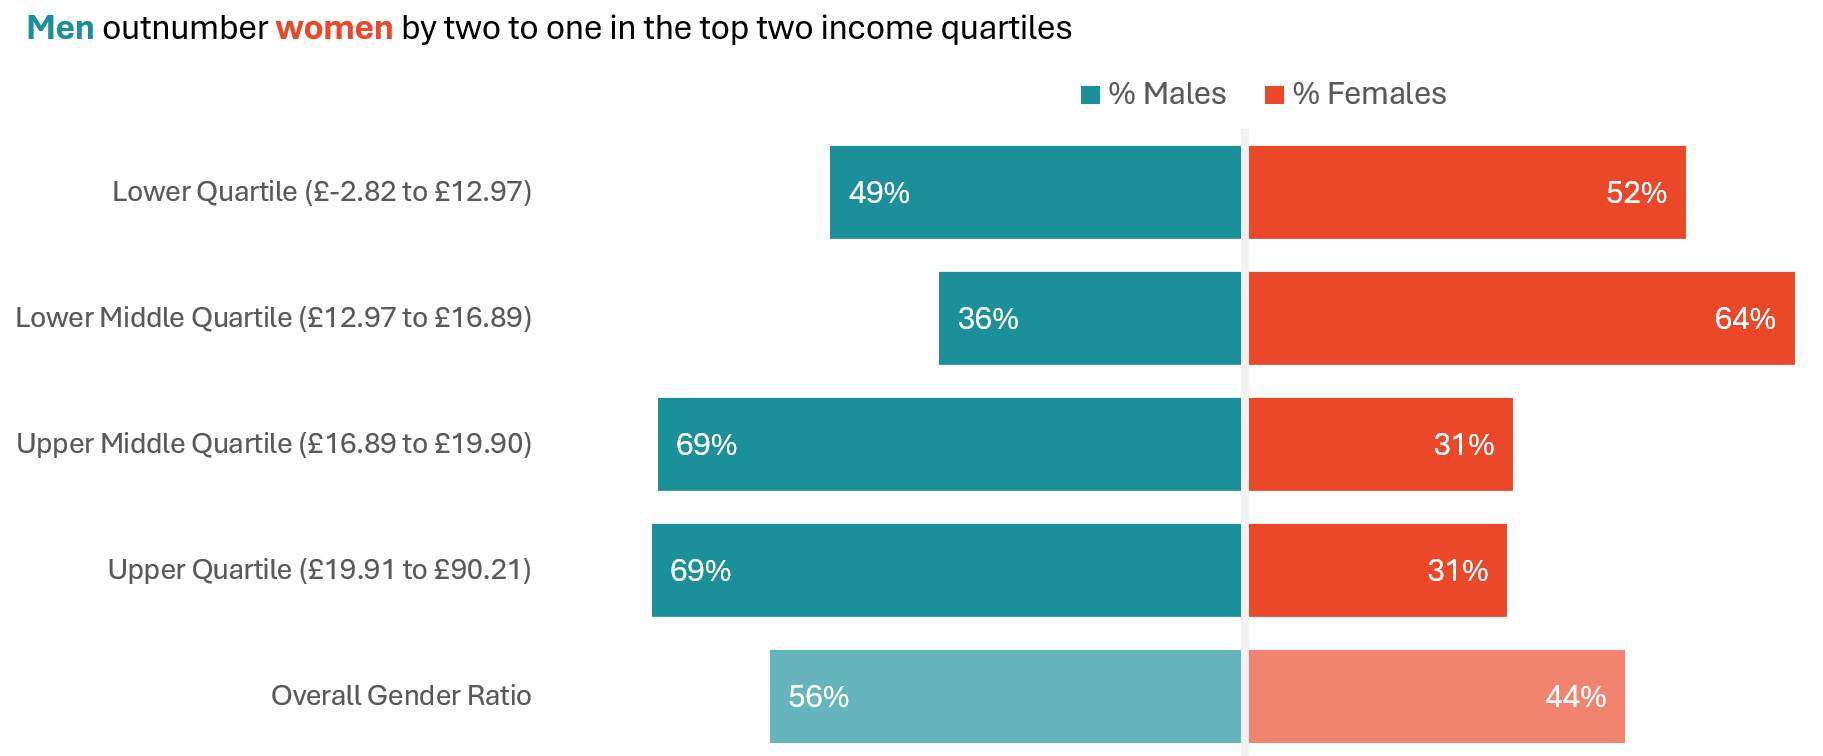 Proportion of gender in each income quartile (explained below). Men outnumber women by two to one in the top two income quartiles